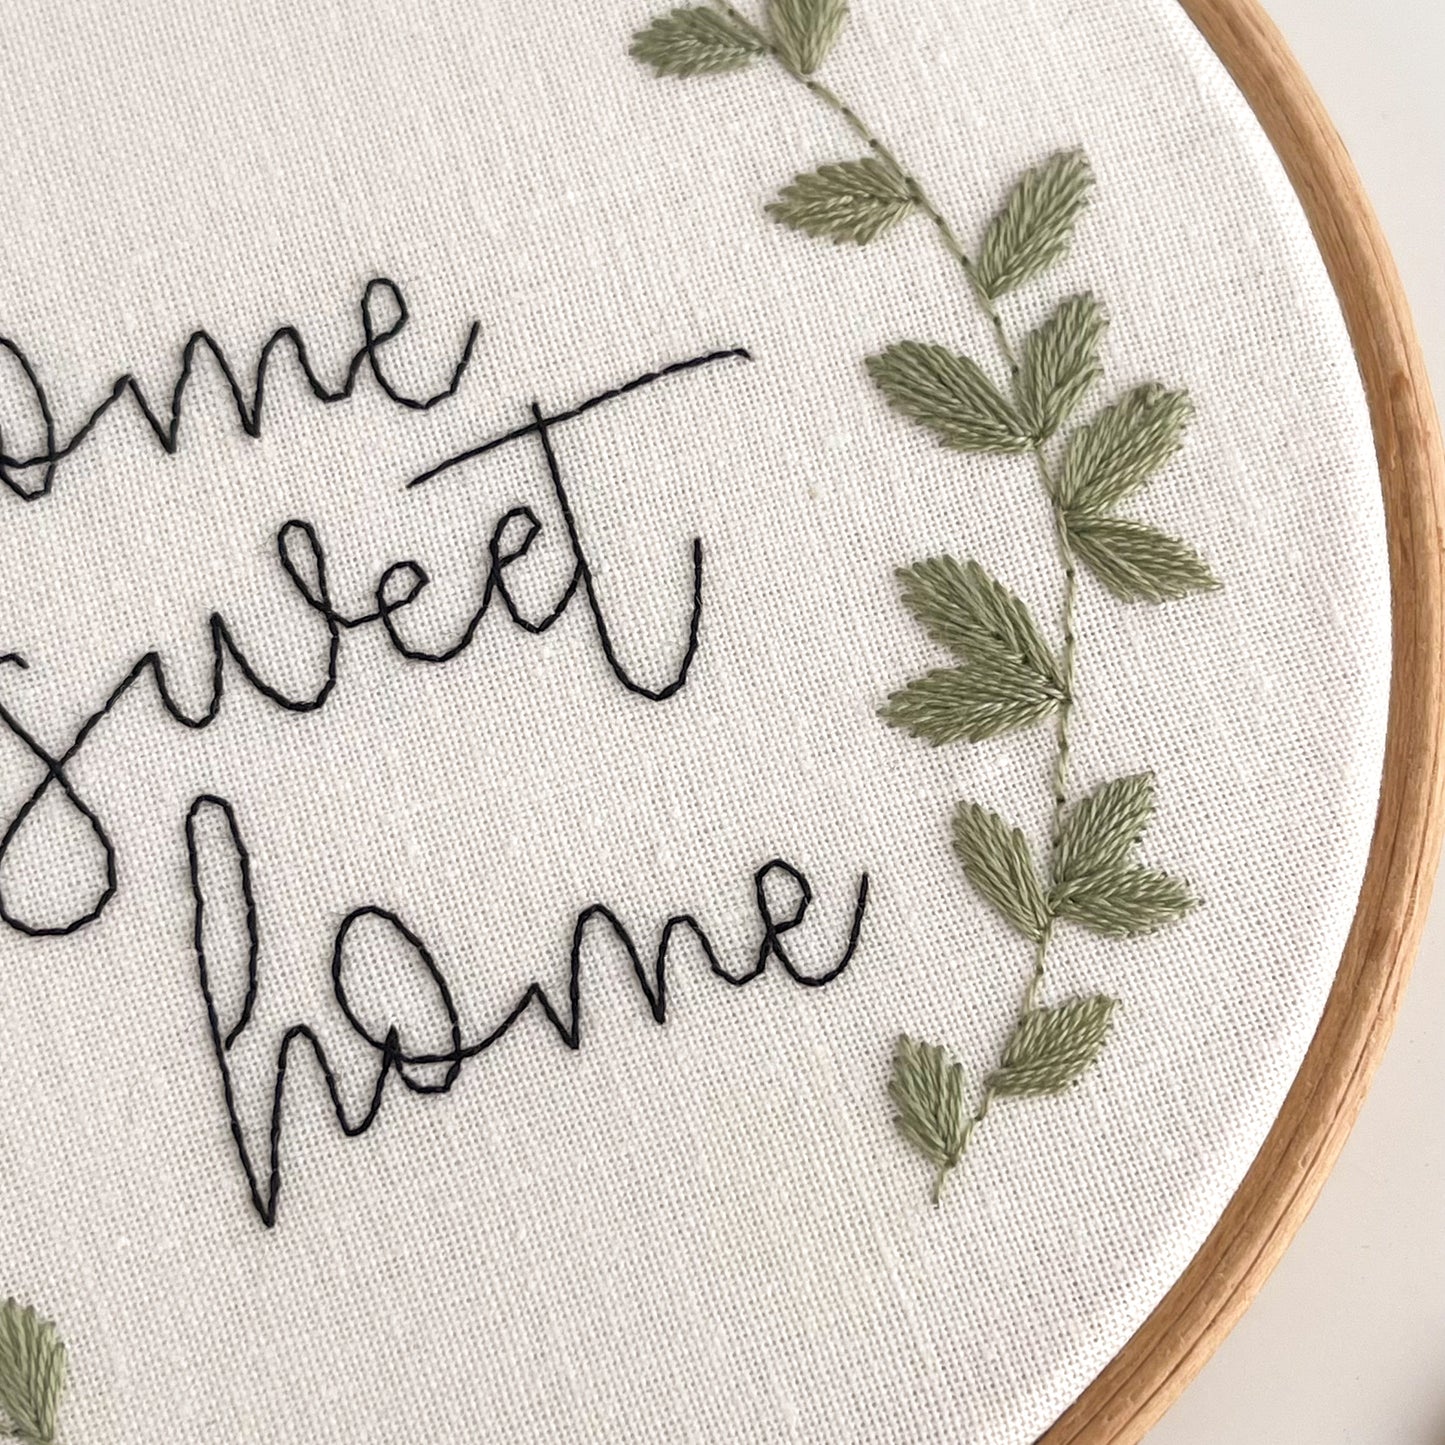 Home Sweet Home Hand Embroidery